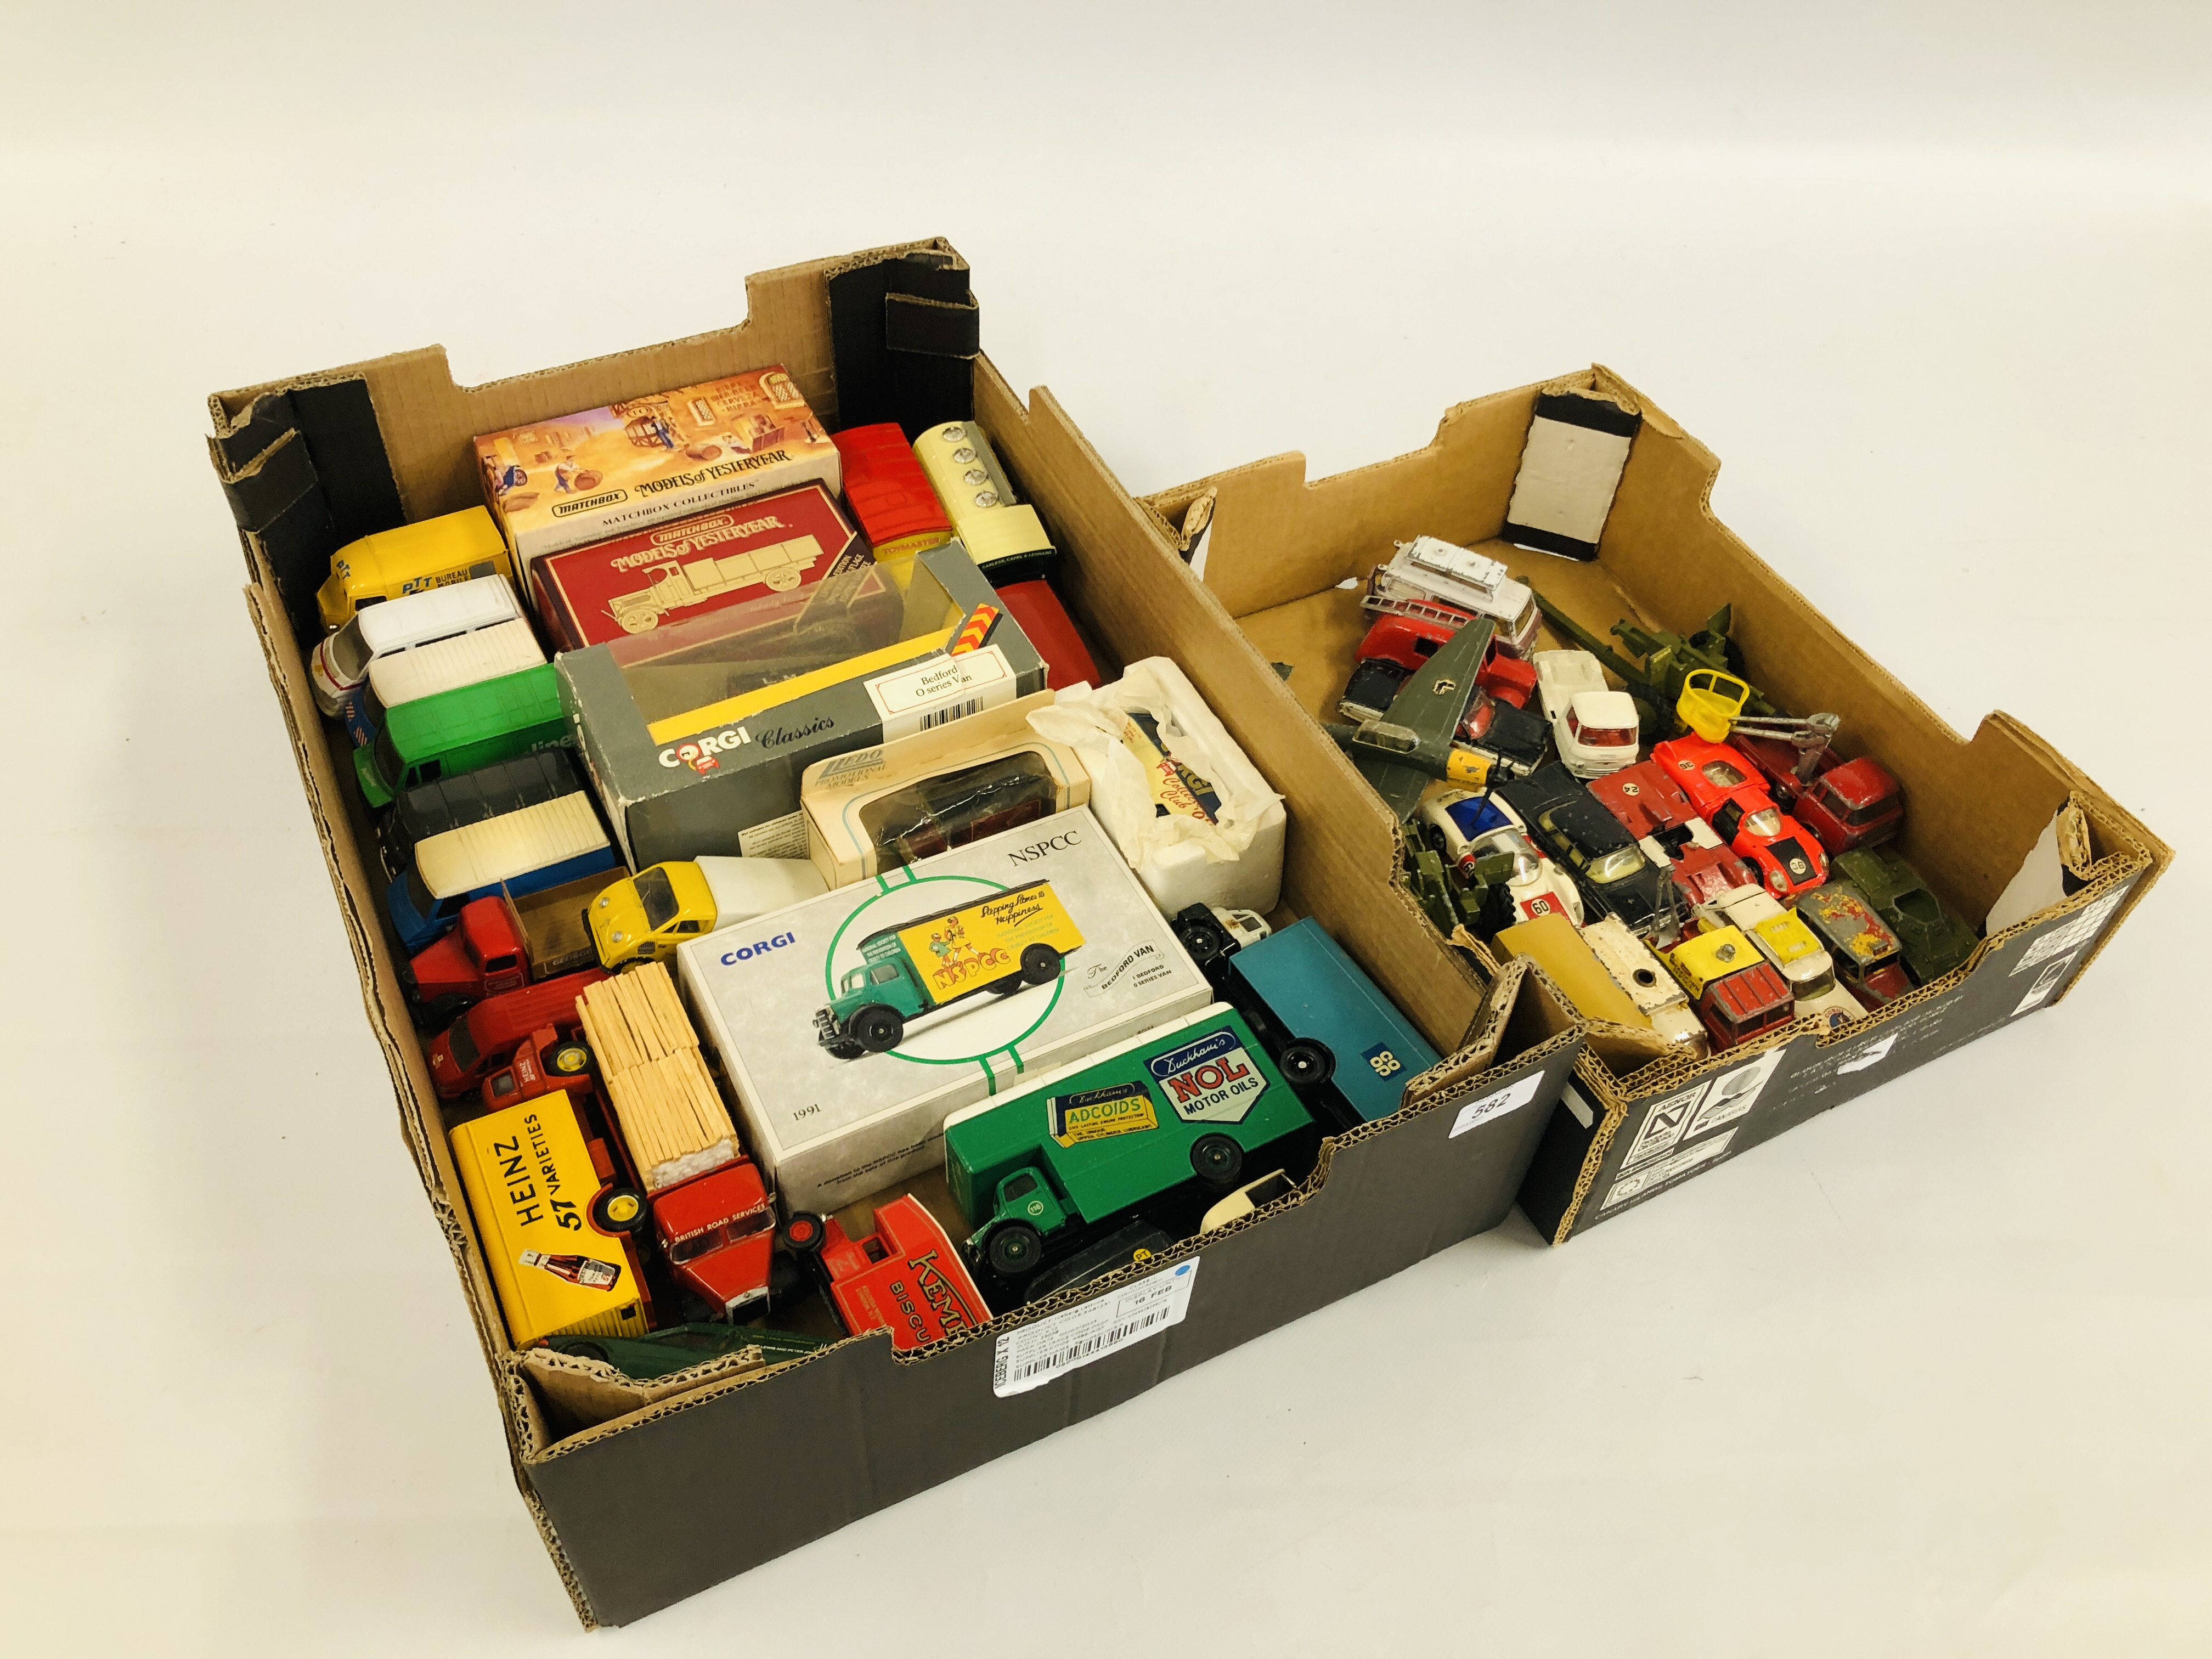 TWO FRUIT CRATES OF VINTAGE AND MODERN DIECAST VEHICLES TO INCLUDE CORGI, DINKY, MATCHBOX ETC.